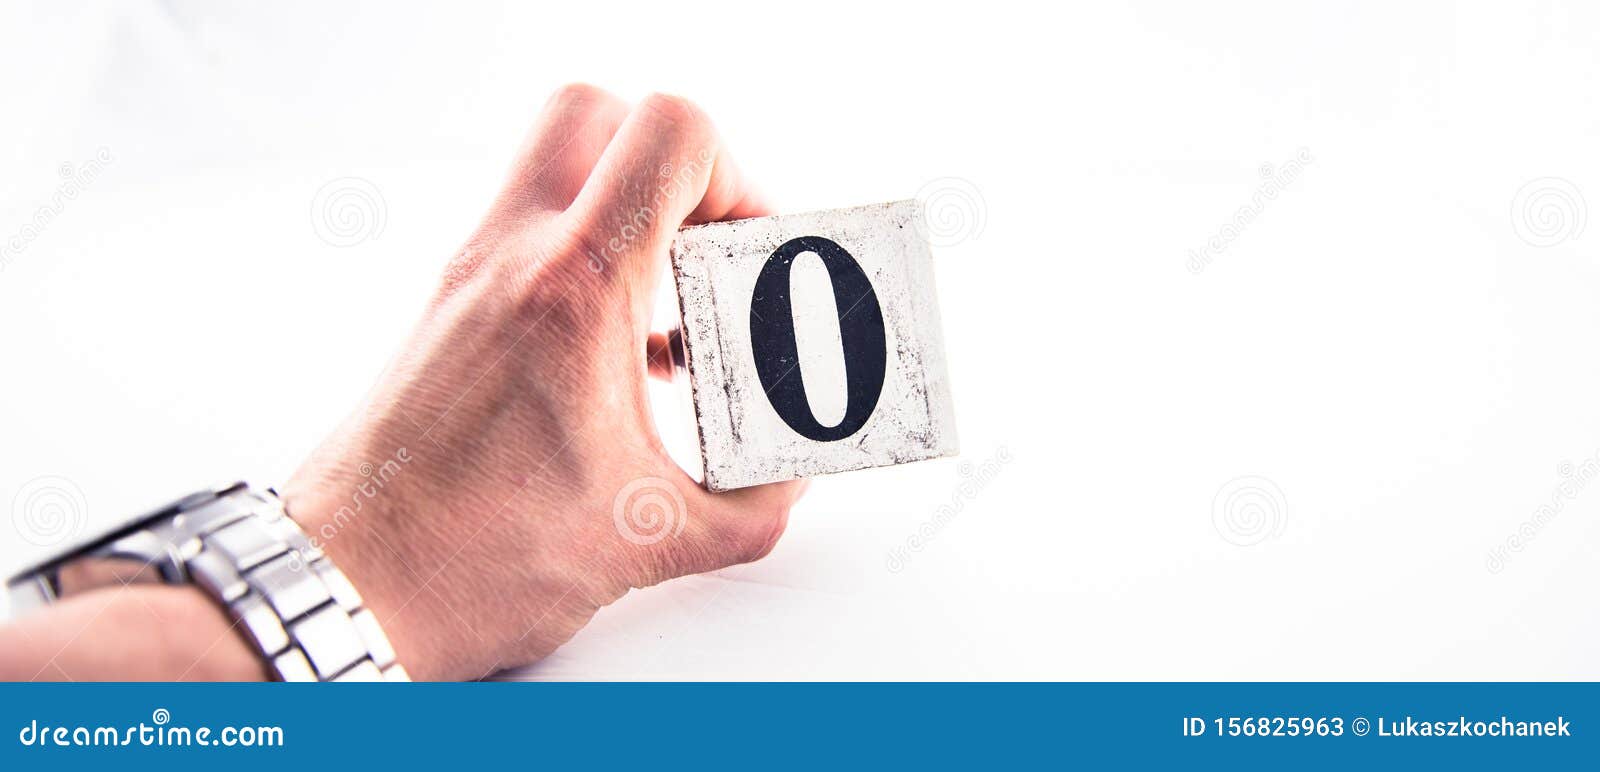 A Hand Holding Digit Number 0 Zero On White Background Stock Image